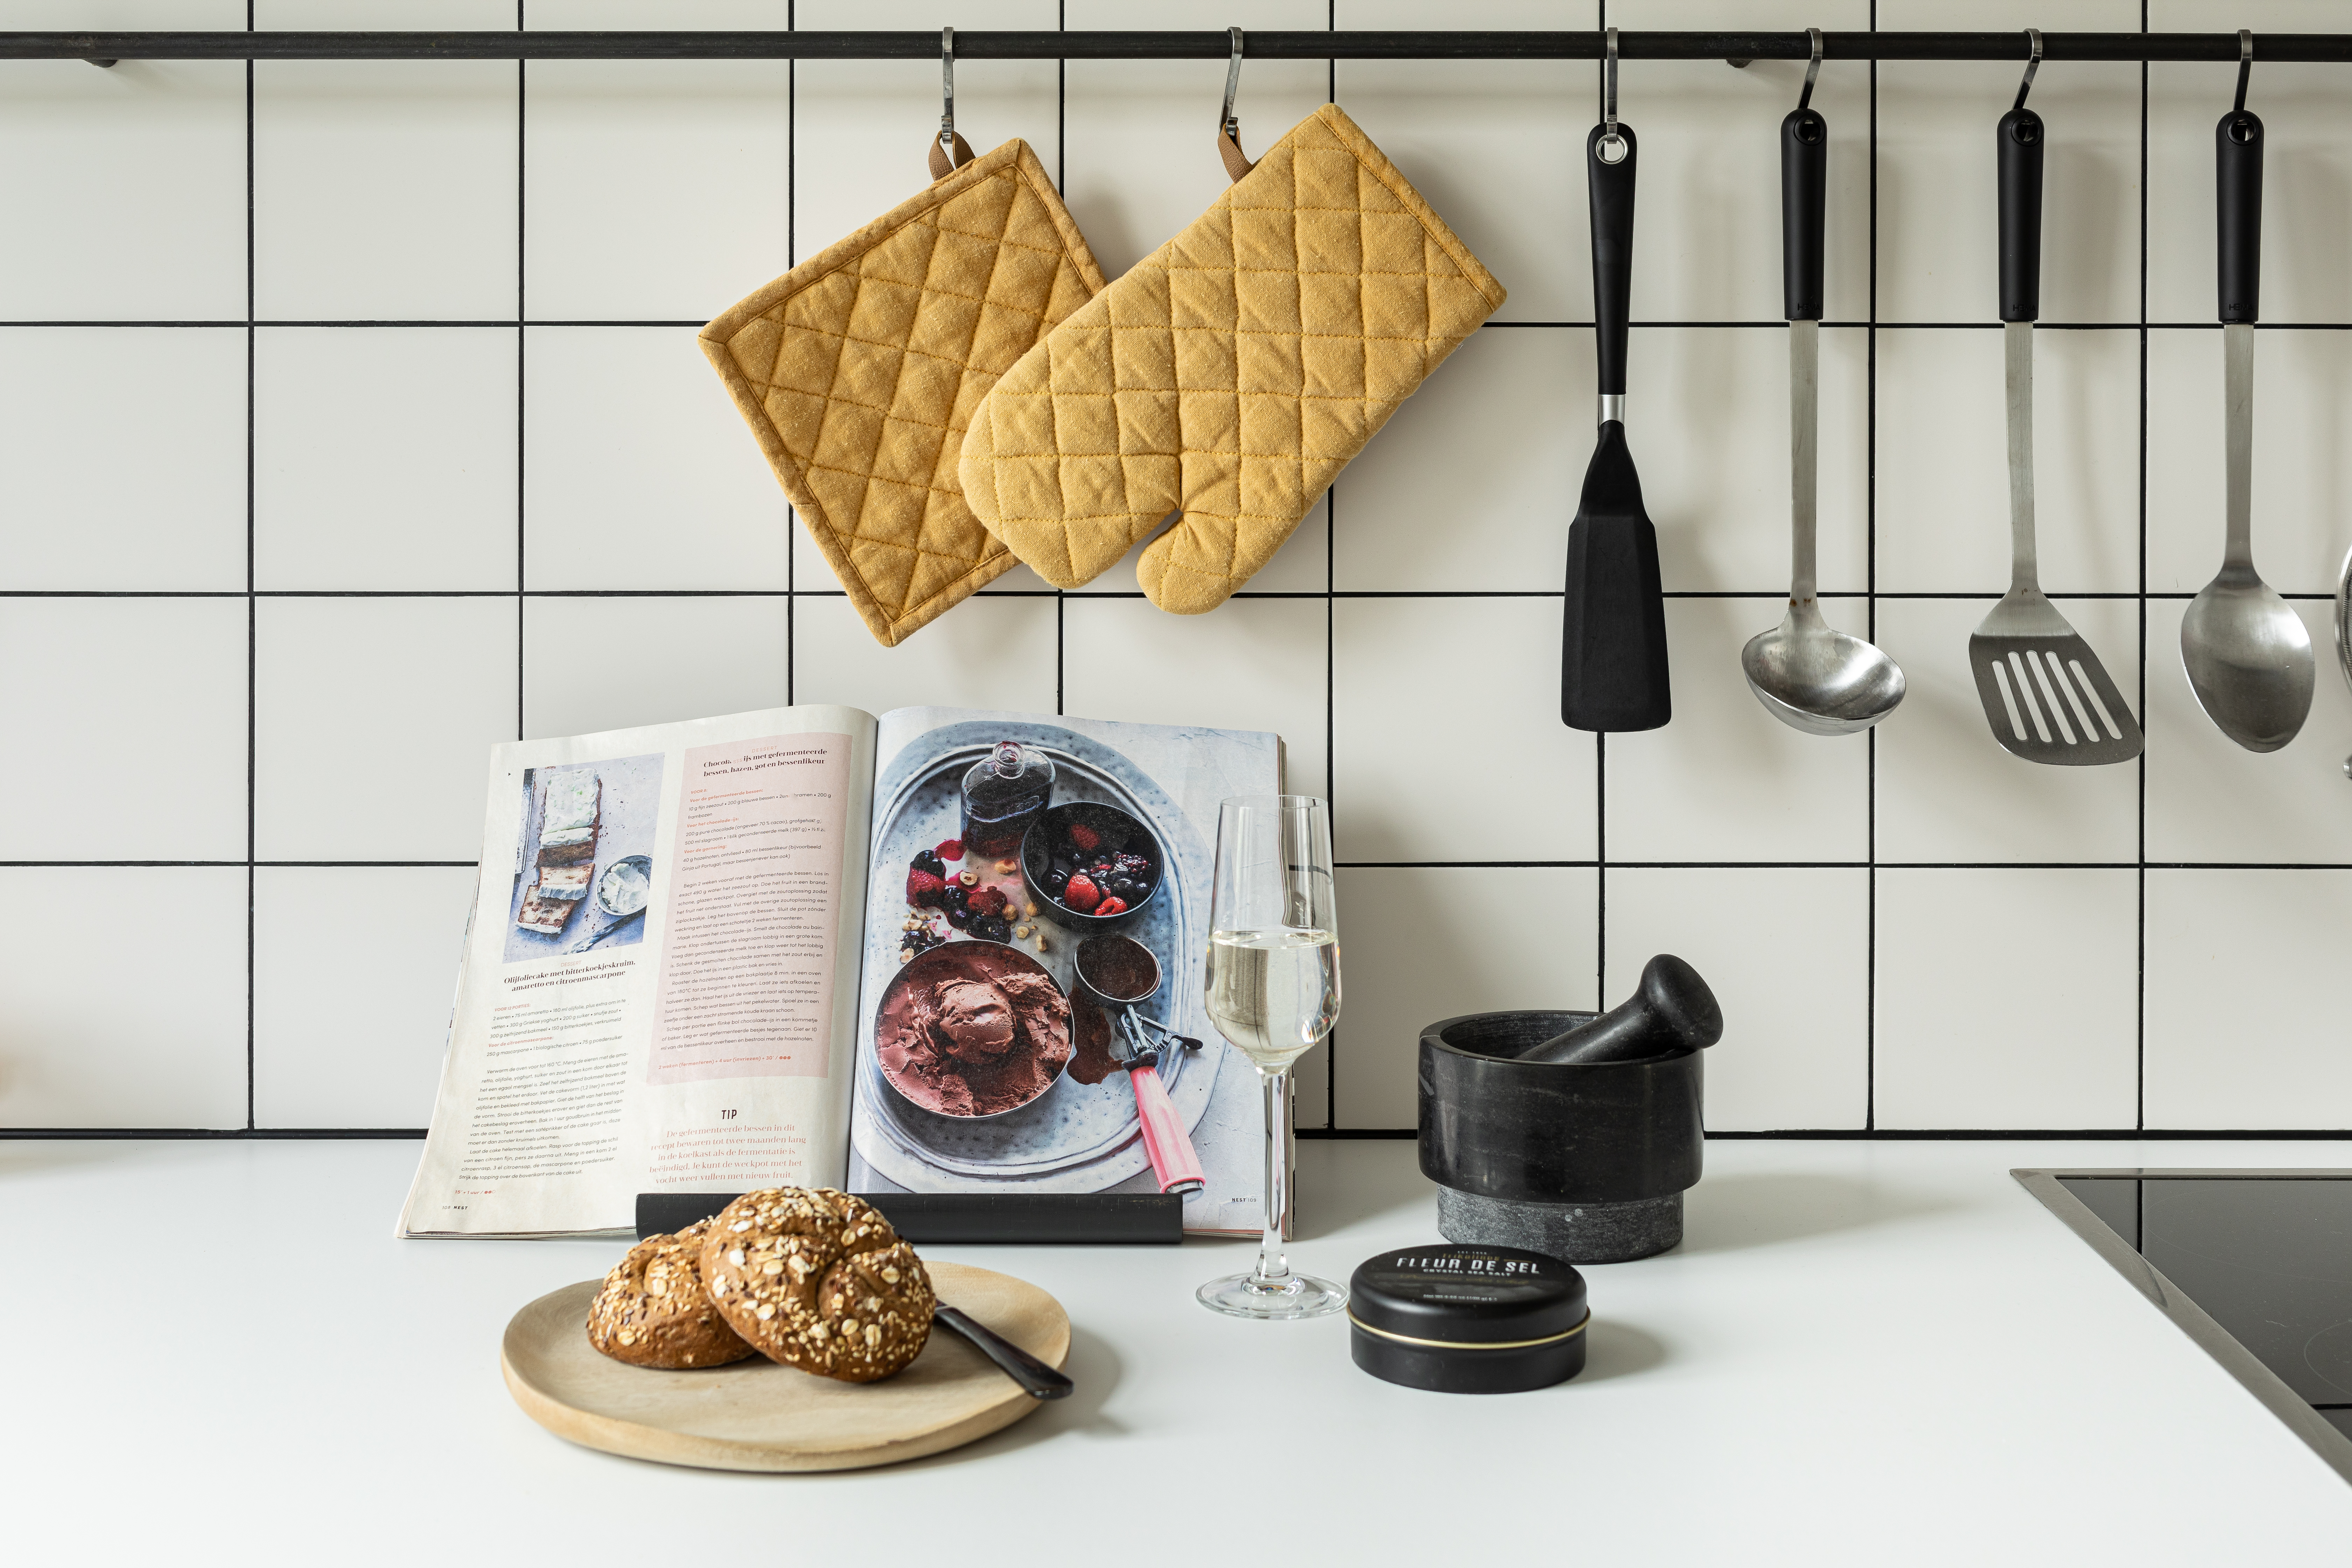 A yellow potholder and oven mitt hang on a kitchen wall.